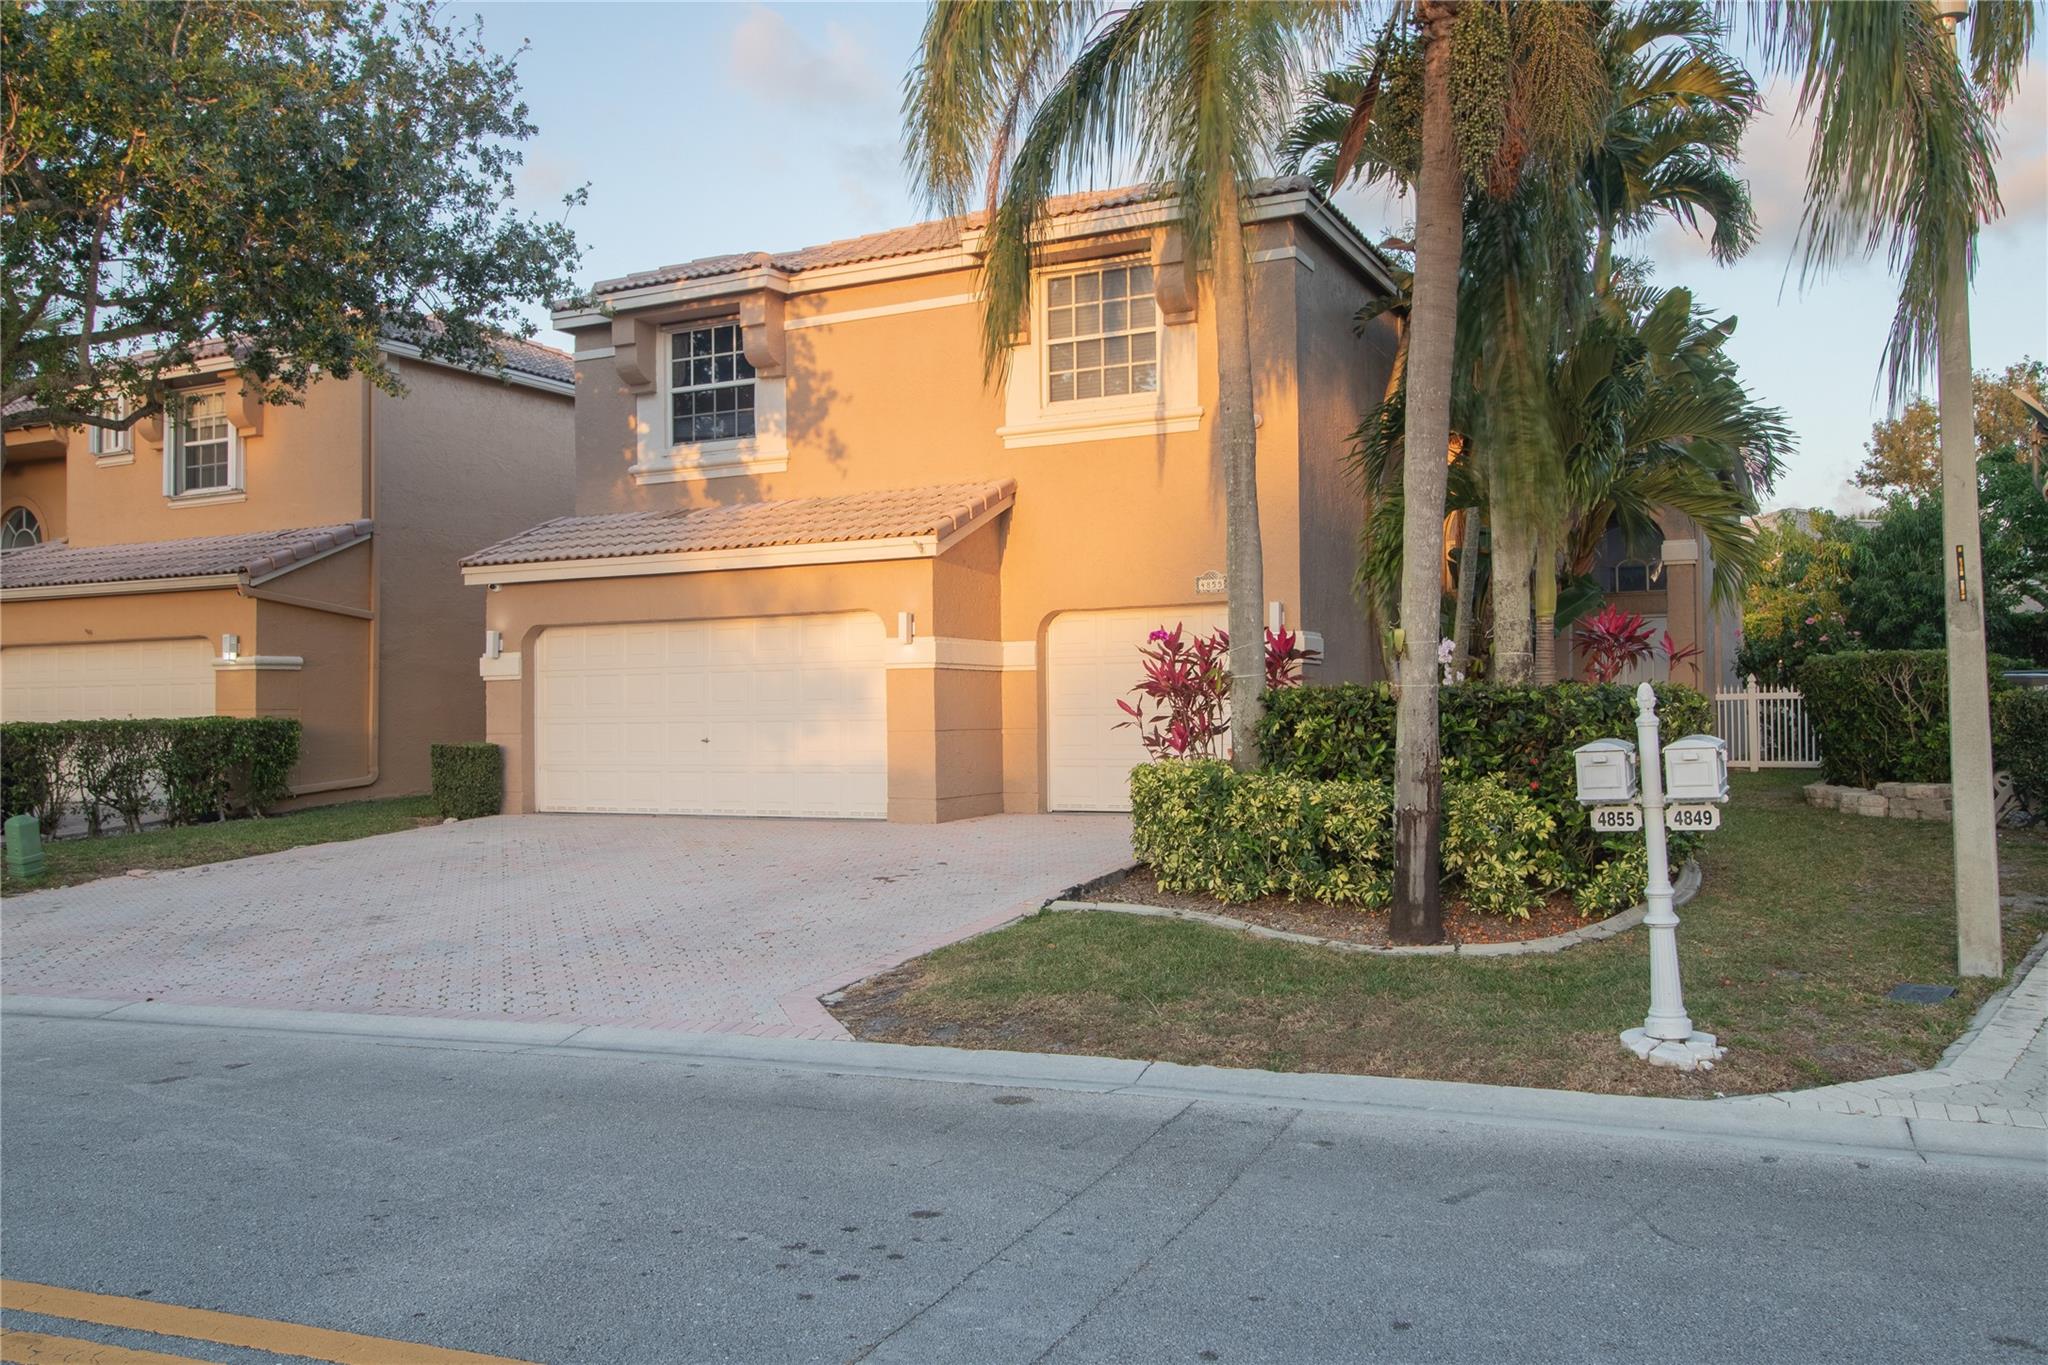 4855 NW 115th, Coral Springs, FL 